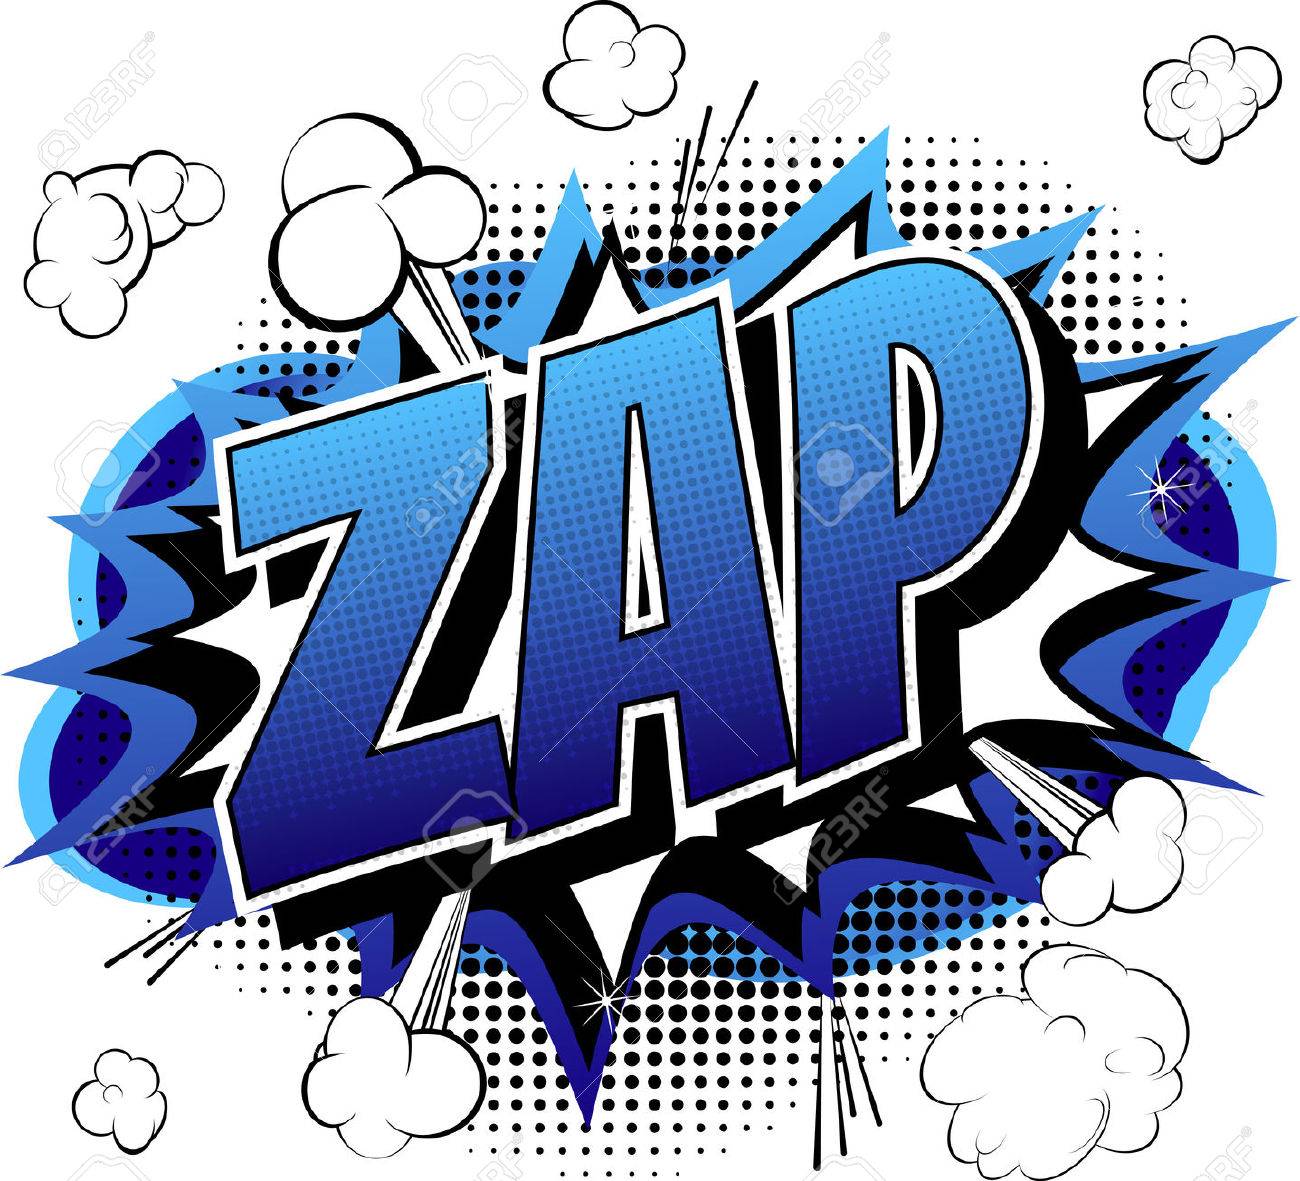 Zap Ic Book Cartoon Expression Isolated On White Background